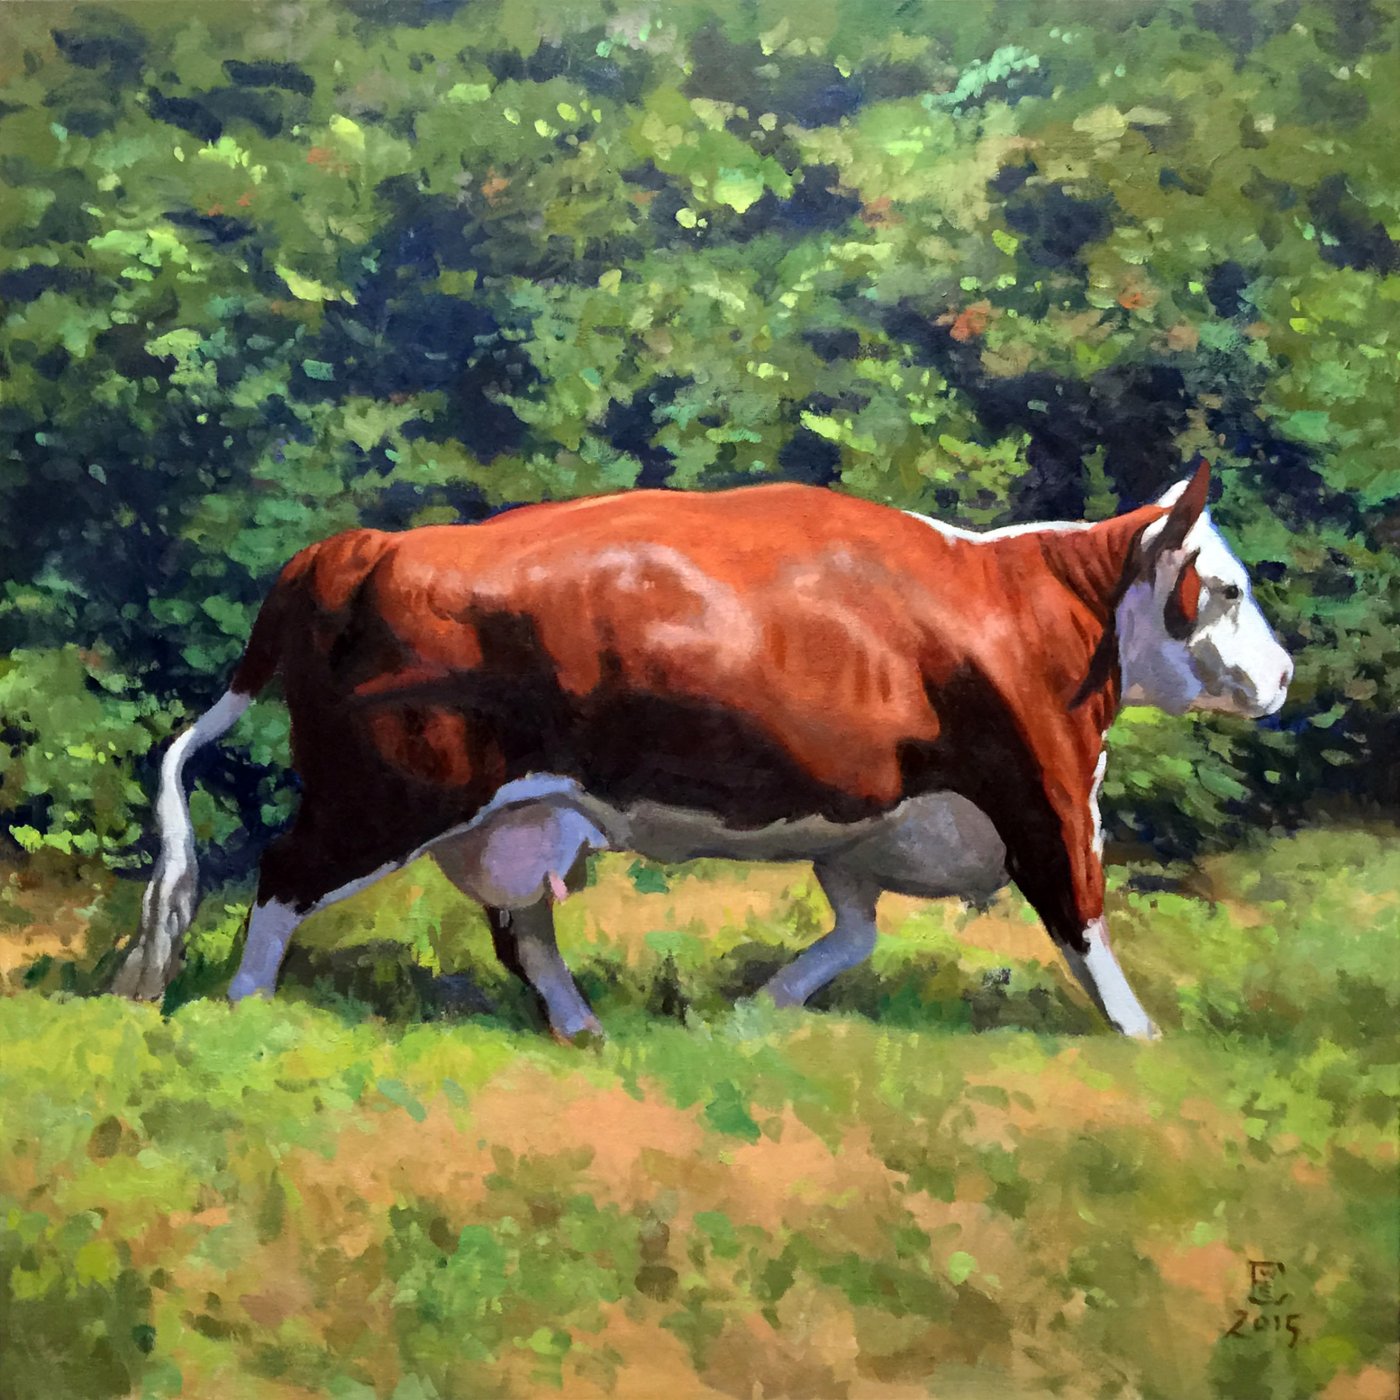 A Beast Of The Field, oil on canvas, 52 x 52 inches, copyright ©2015